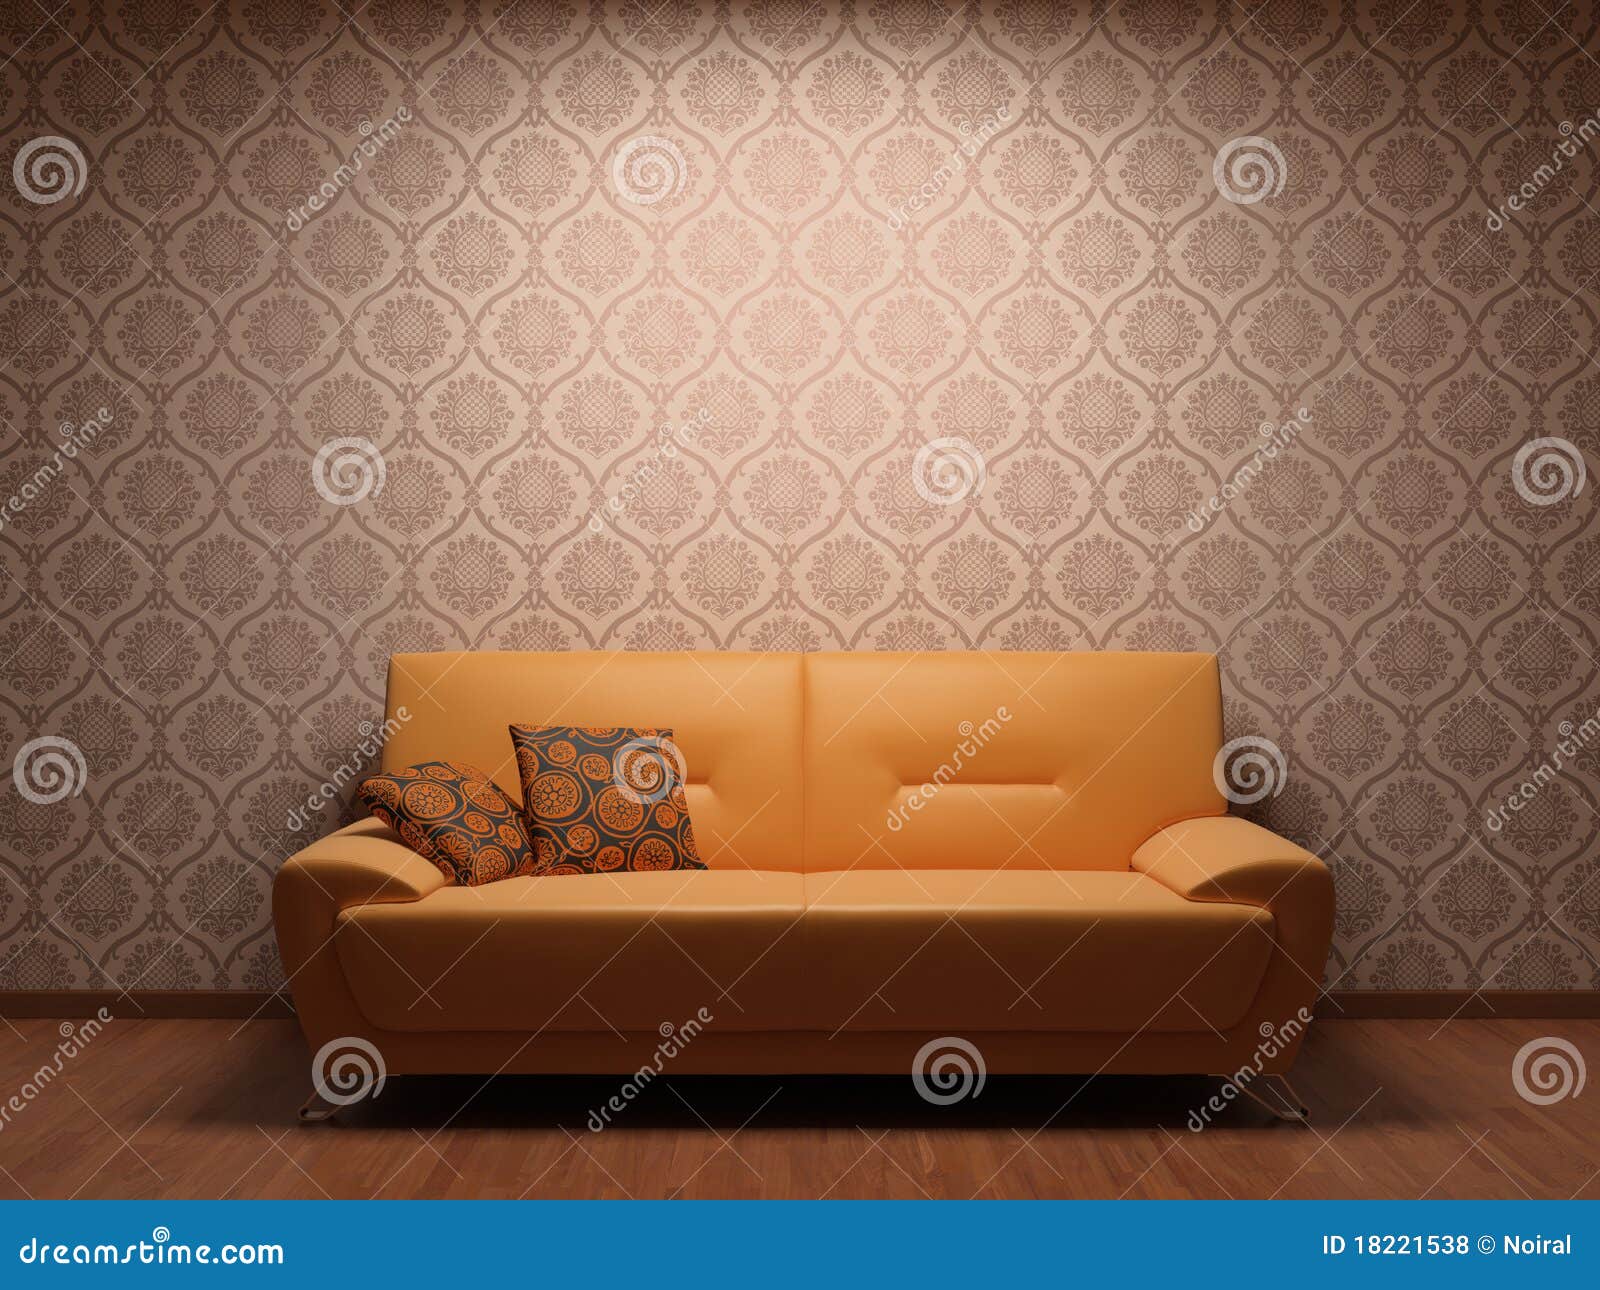 sofa in rest room